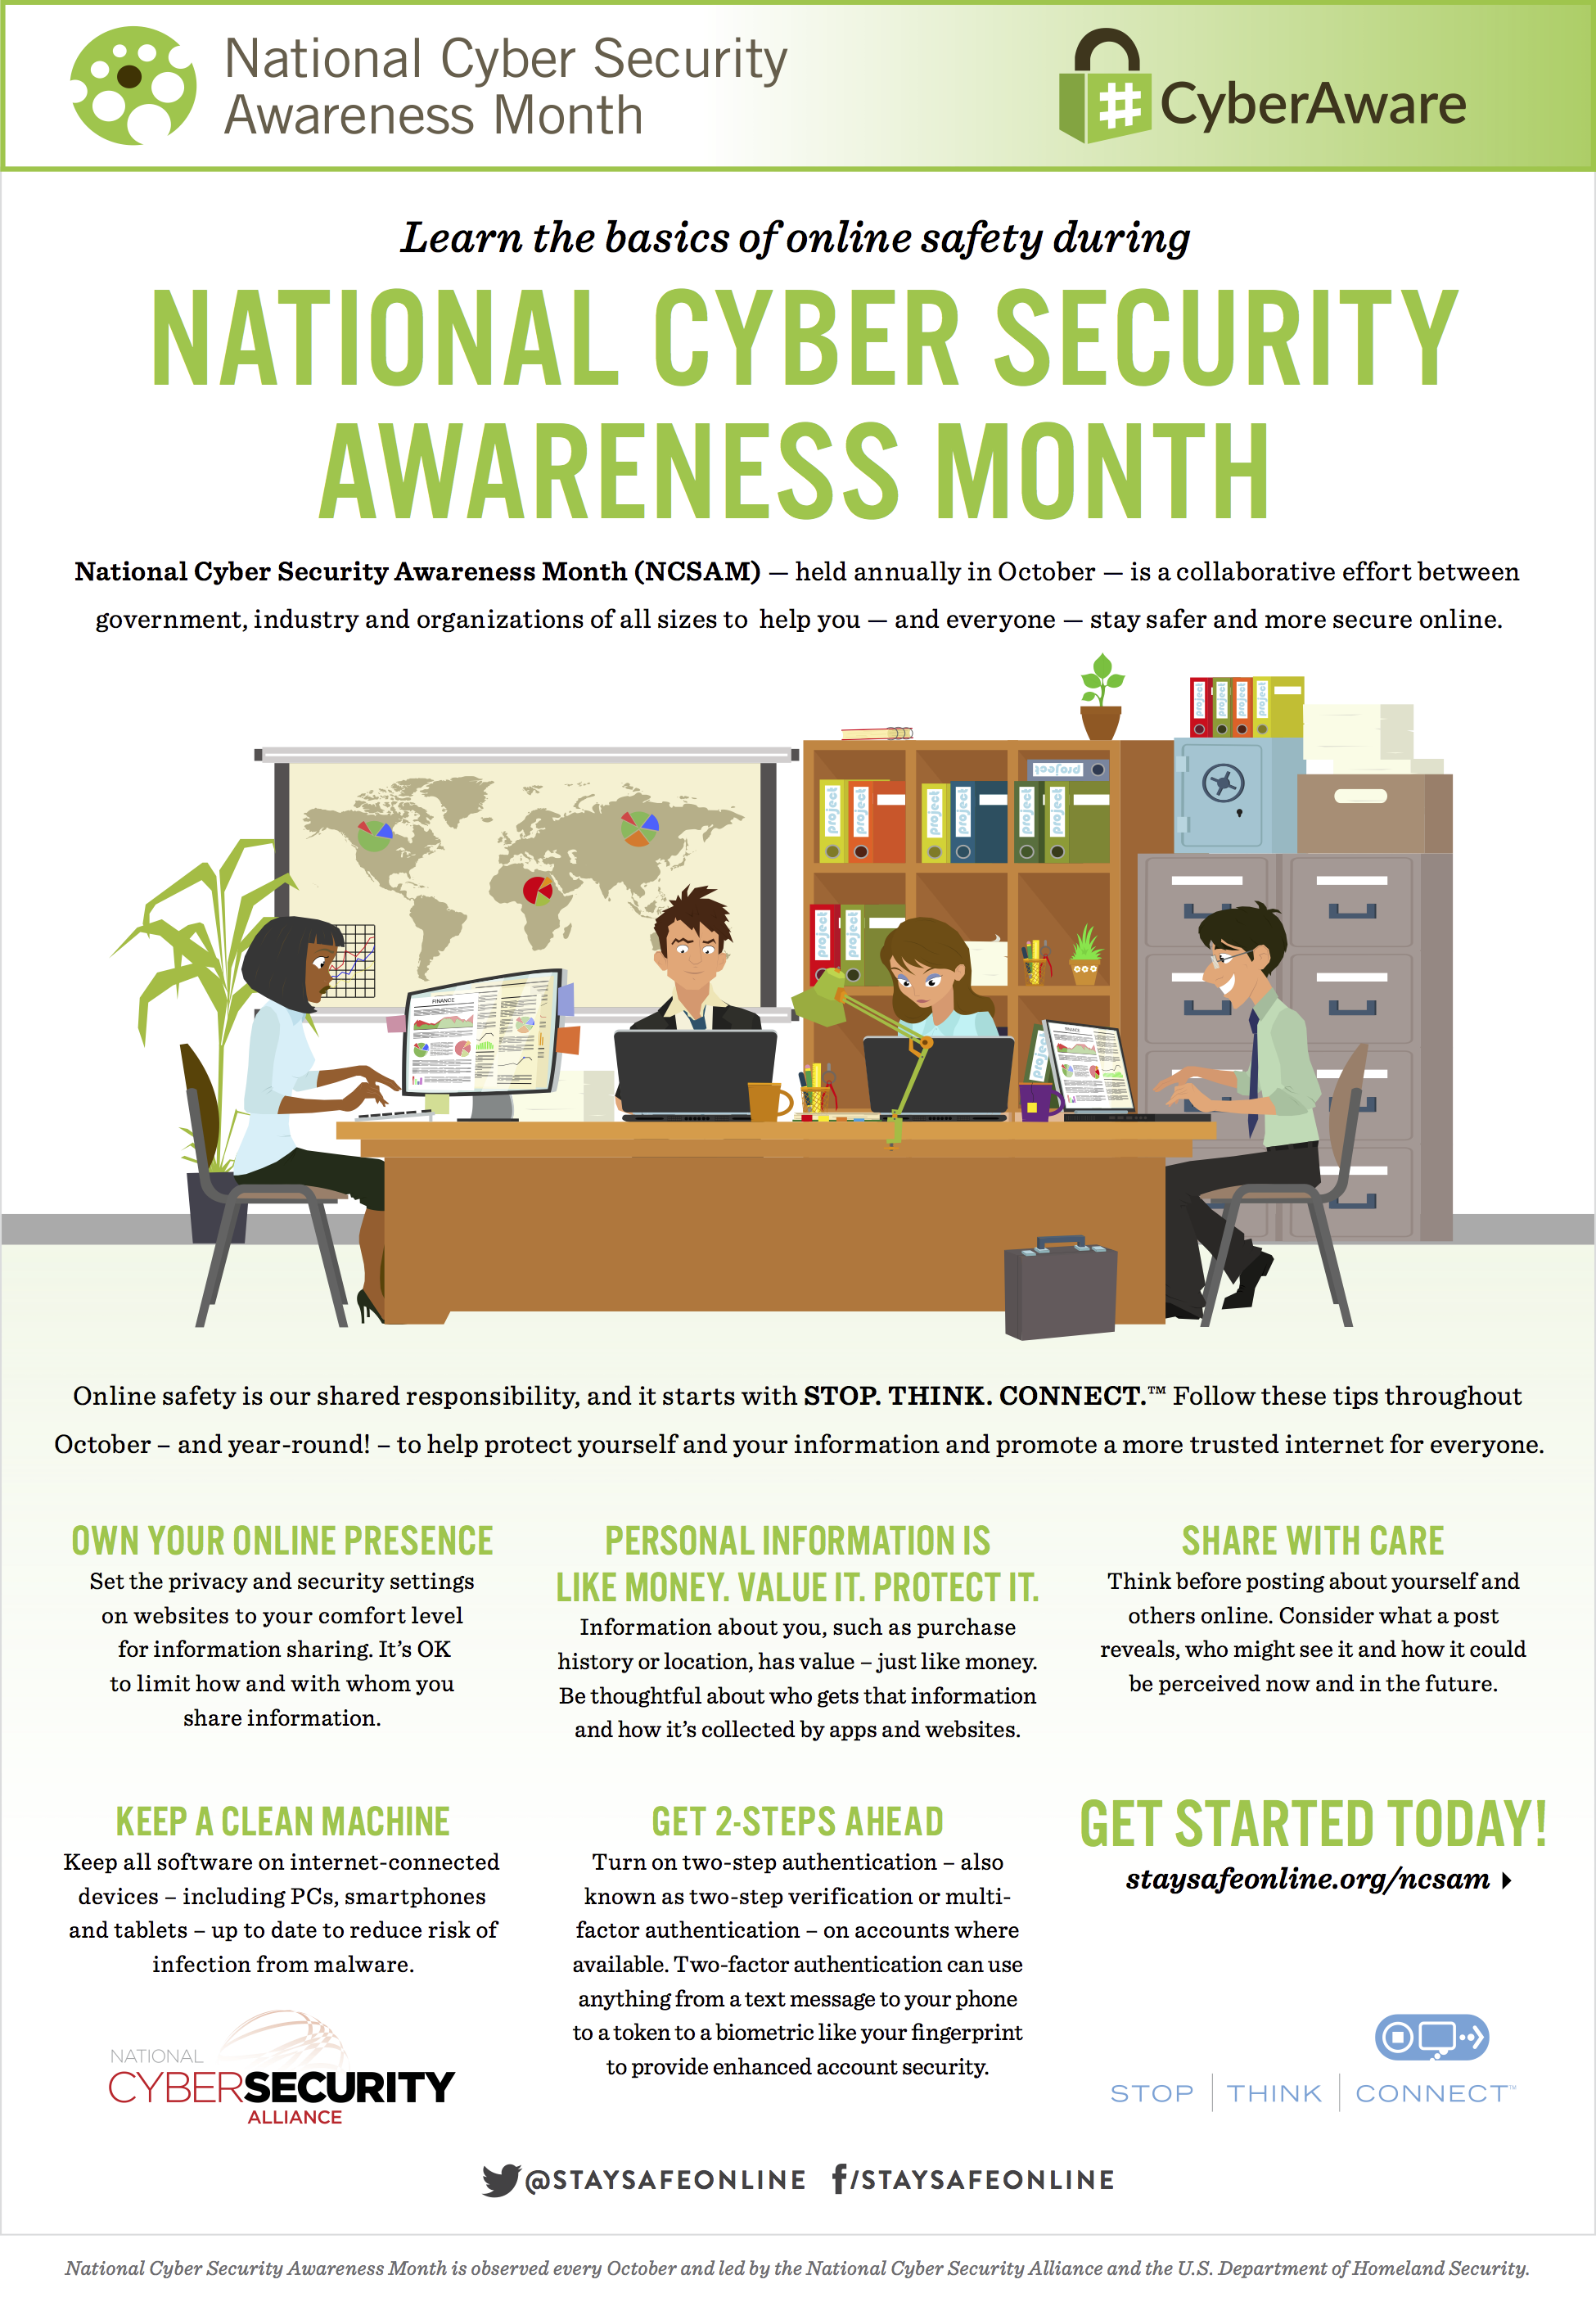 Learn-the-Basics-of-Online-Safety-During-National-Cyber-Security-Awareness-Month-Infographic.png